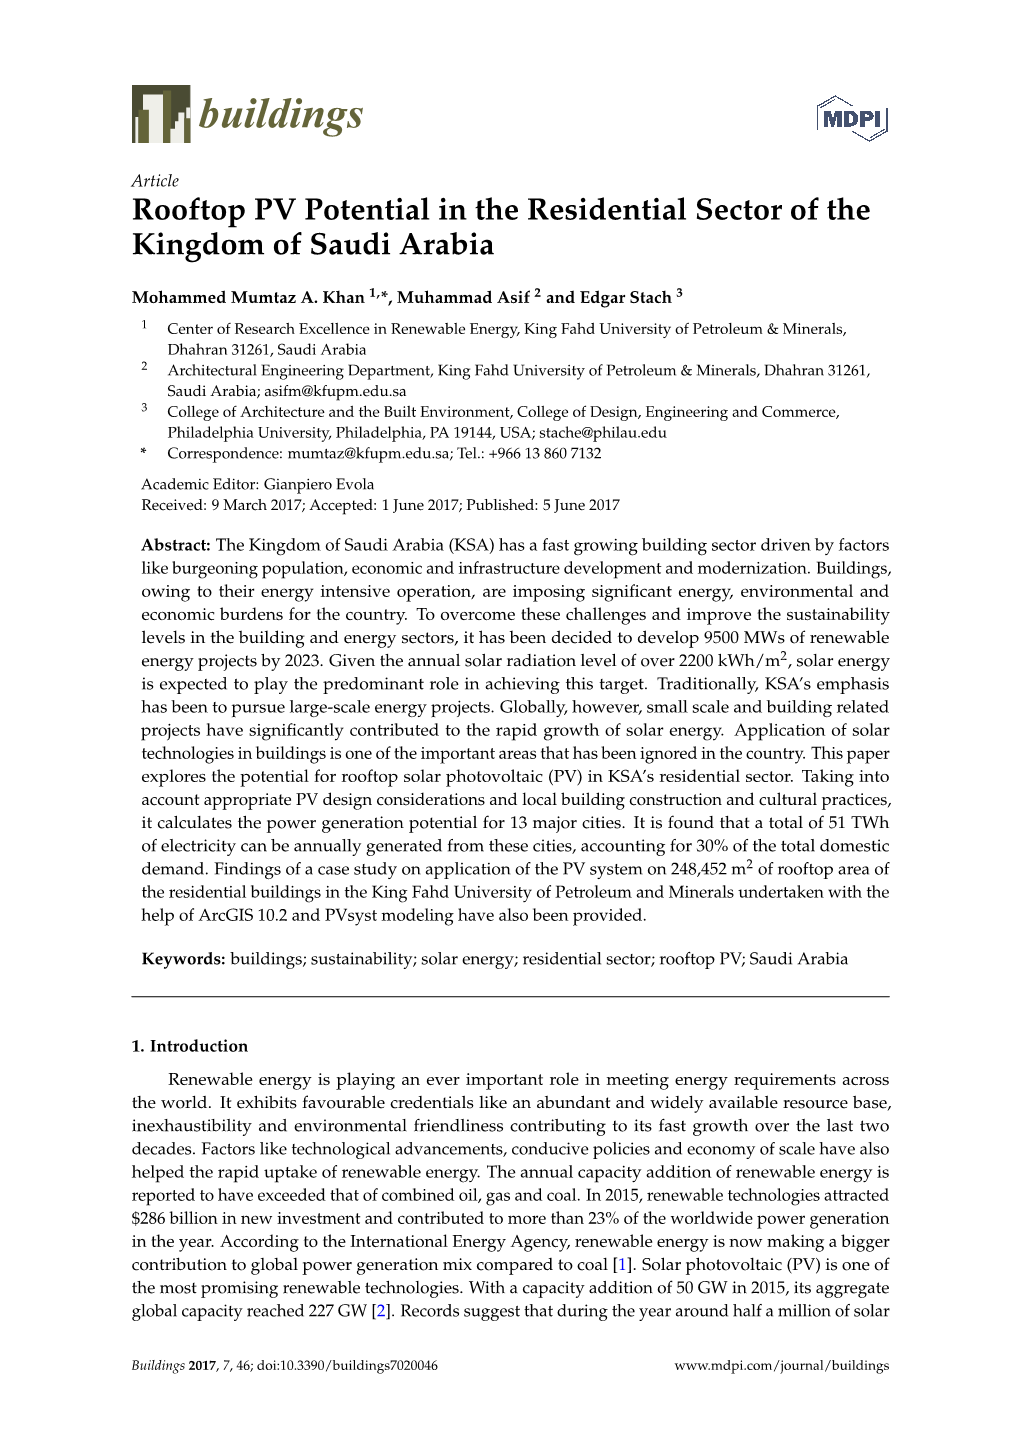 Rooftop PV Potential in the Residential Sector of the Kingdom of Saudi Arabia